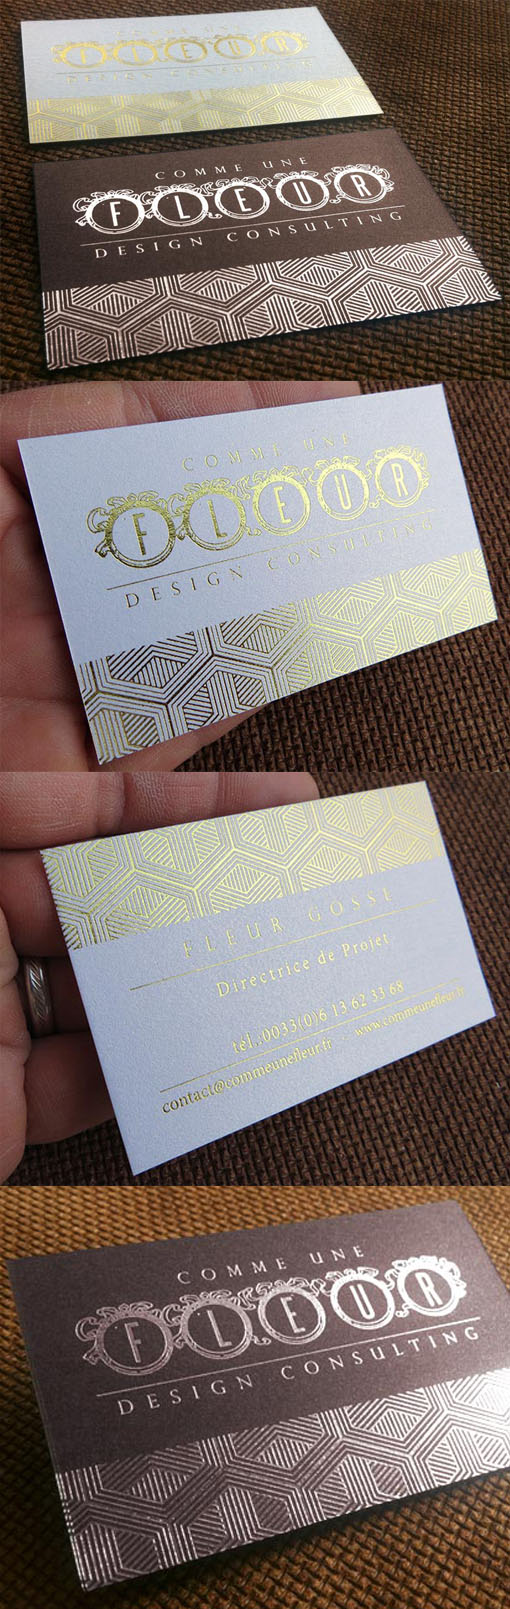 Stylish Textured Gold And Silver Hot Foil Stamped Business Card Design